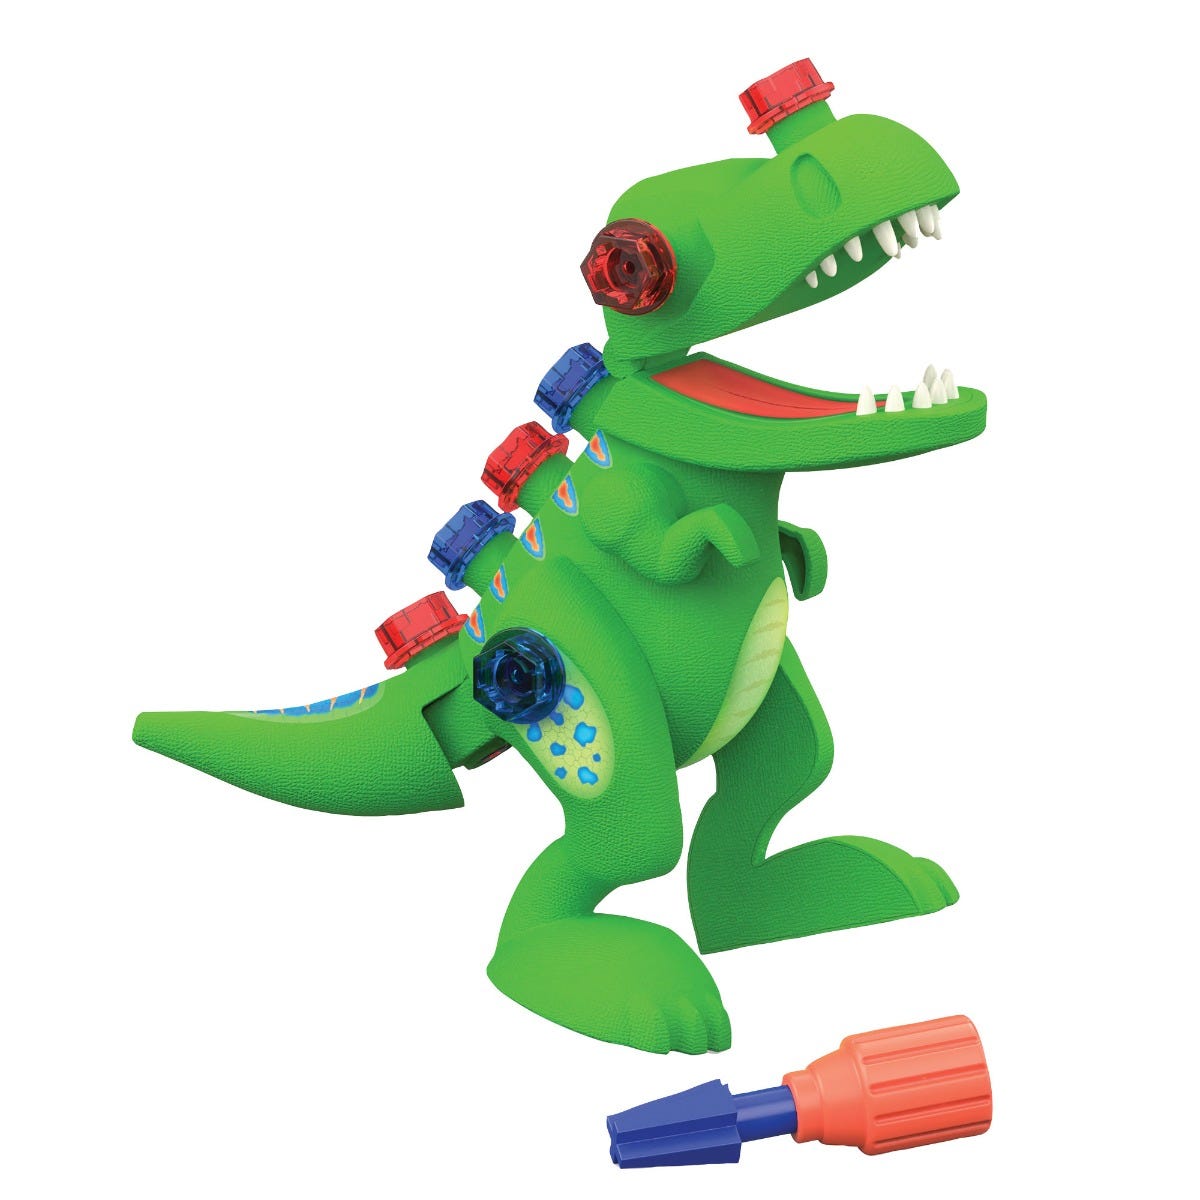 Design & Drill® Take-Apart T-Rex, Build your own T-rex with this dinosaur construction kit for preschoolers from Design & Drill®! Children use tools perfectly-sized for little hands to tinker with their very own dinosaur toy with moveable mouth and legs. Snap the 4 pieces together, and then use the kid-sized screwdriver to screw in the chunky, colourful bolts. Then head off into roar-some imaginative play with the Design & Drill Take-Apart T-Rex. Kids roar into creative play and build coordination skills as